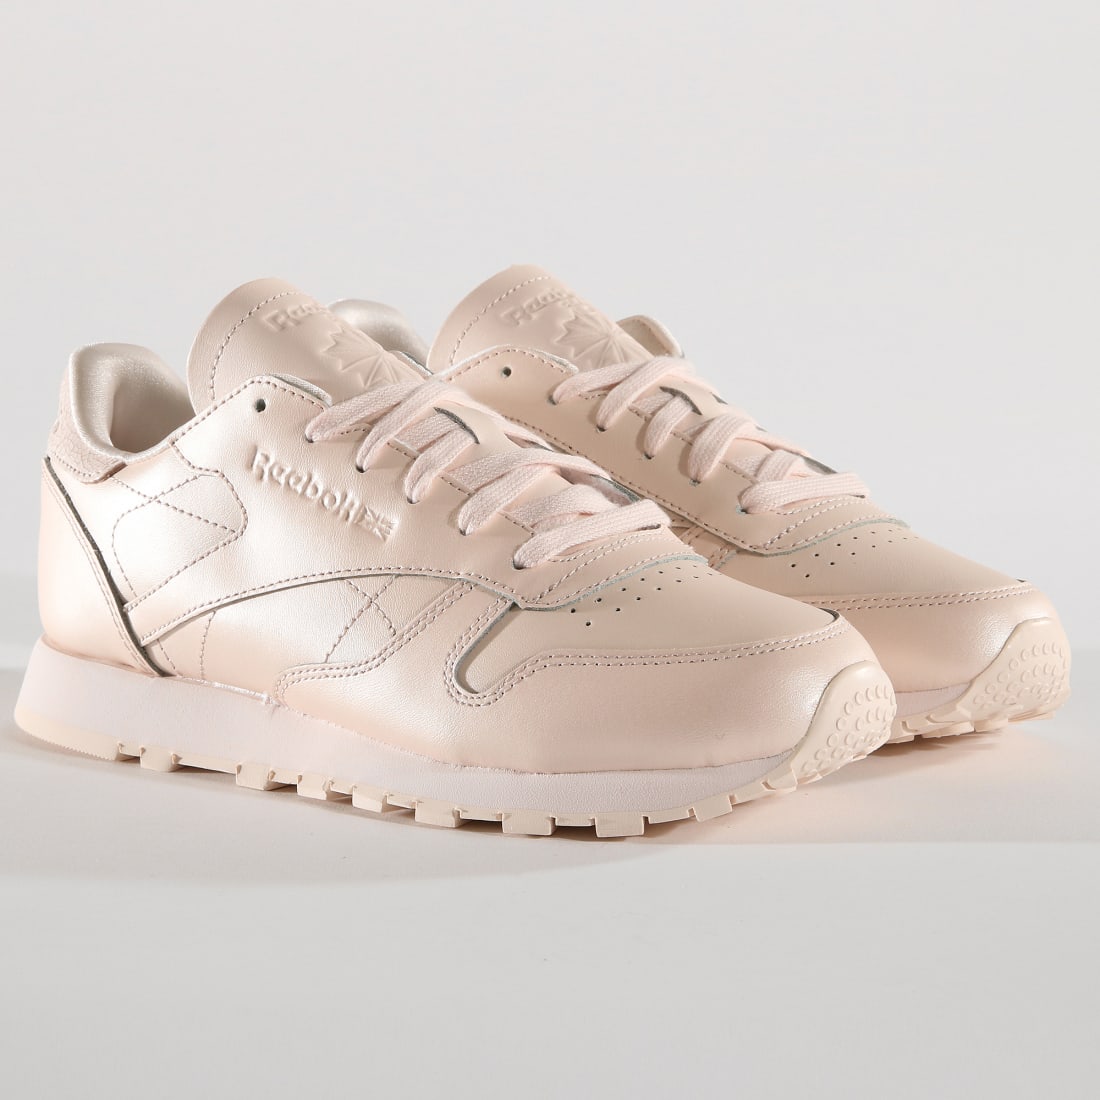 Reebok - Baskets Femme Classic Leather CN5467 Pale Pink -